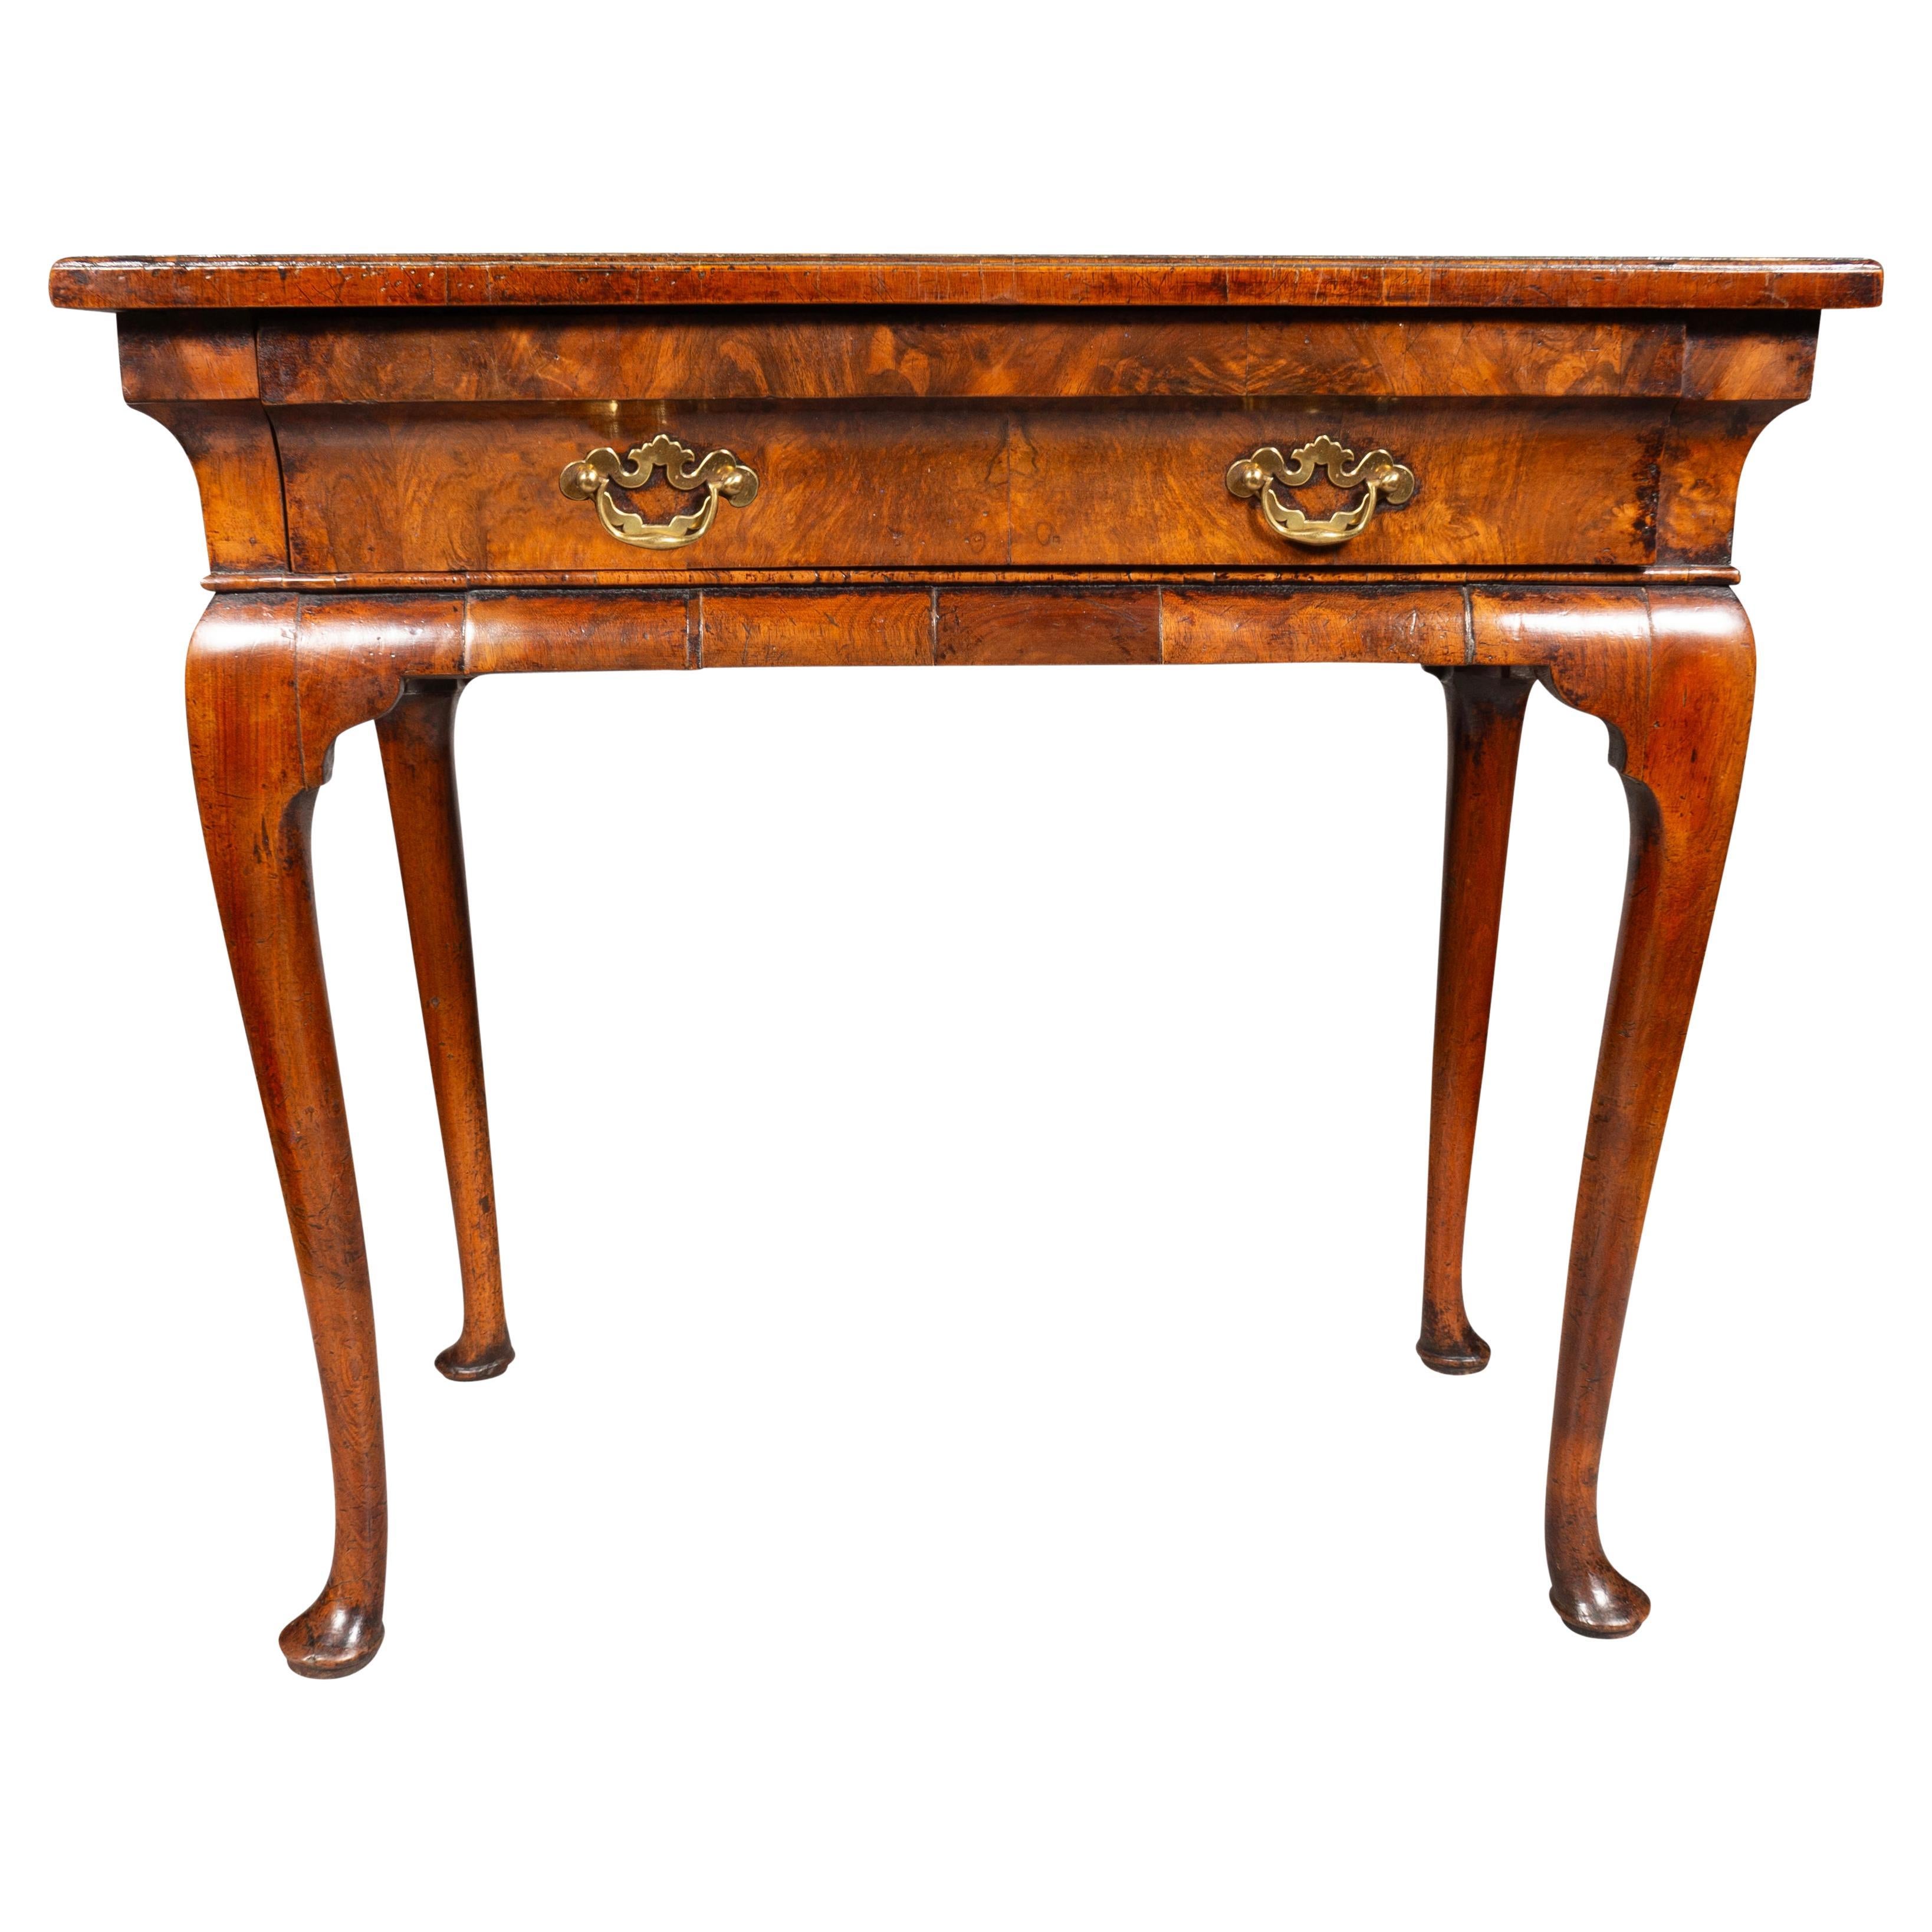 Rectangular burl wood top with crossbanded edge over shaped frieze with a conforming  drawer with two brass handles. Cabriole legs and pad feet. Provenance; Florian Papp. Sold 28,000 in 2000.